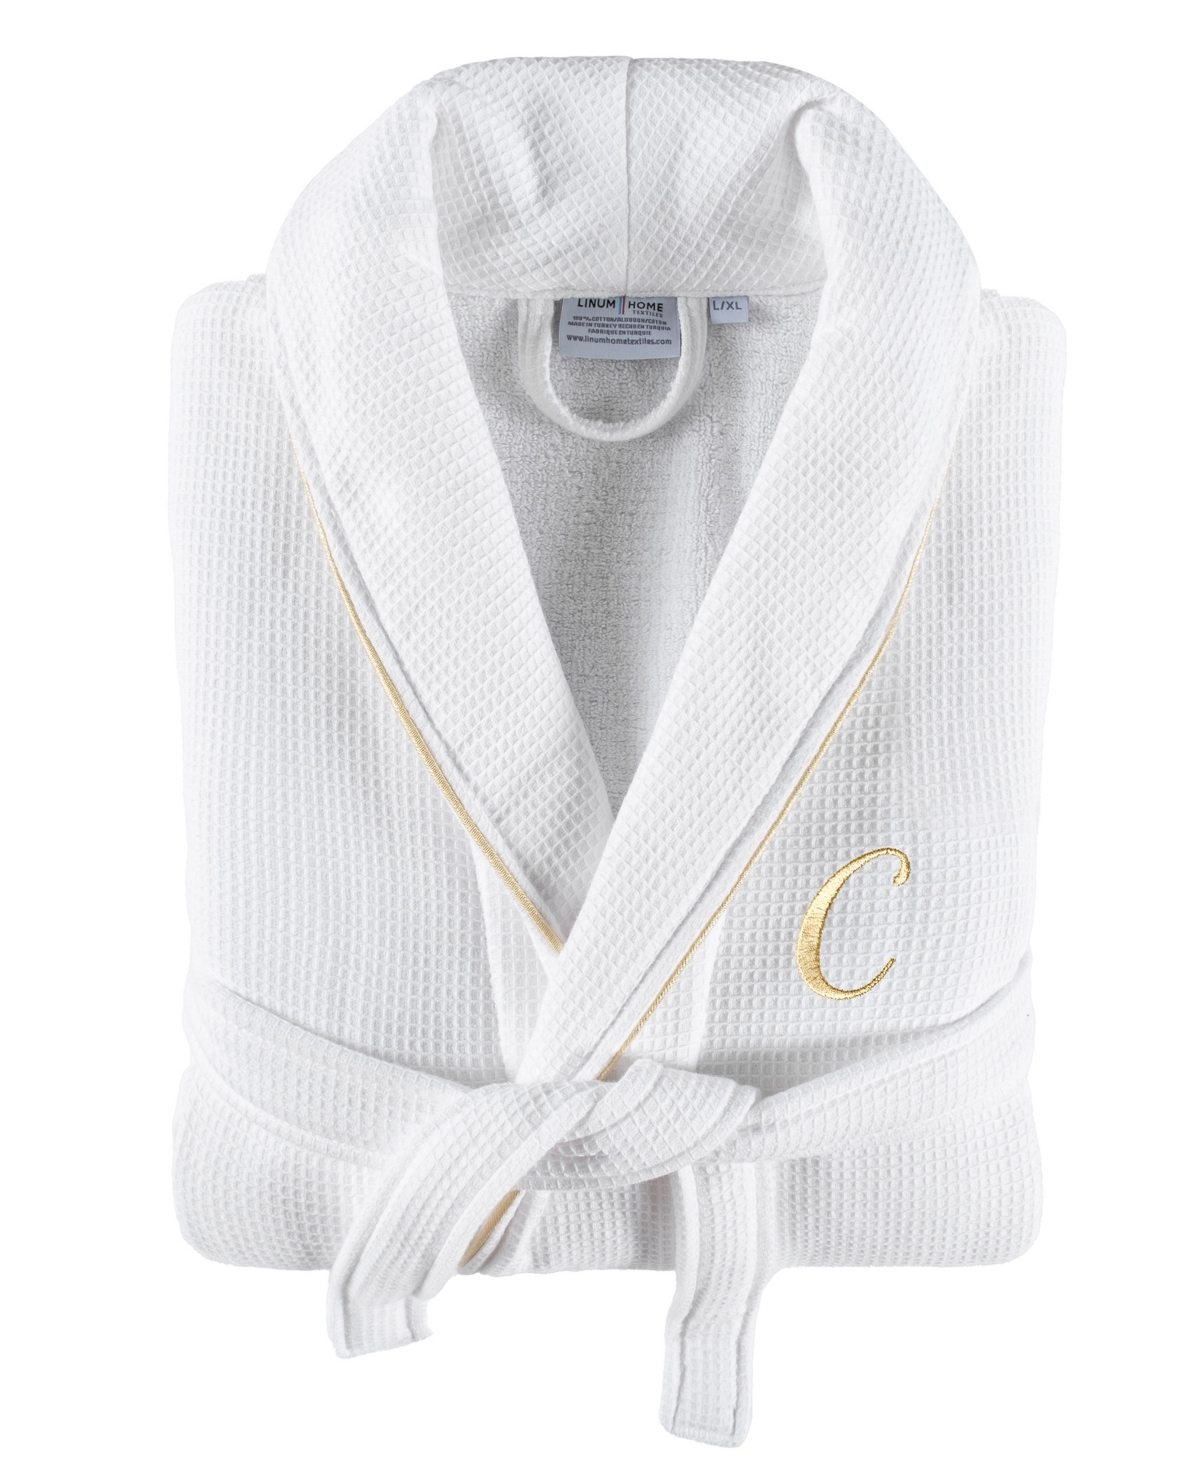 Linum Home Textiles 100% Turkish Cotton Unisex Personalized Waffle Weave Terry Bathrobe With Satin Piped Trim In White C